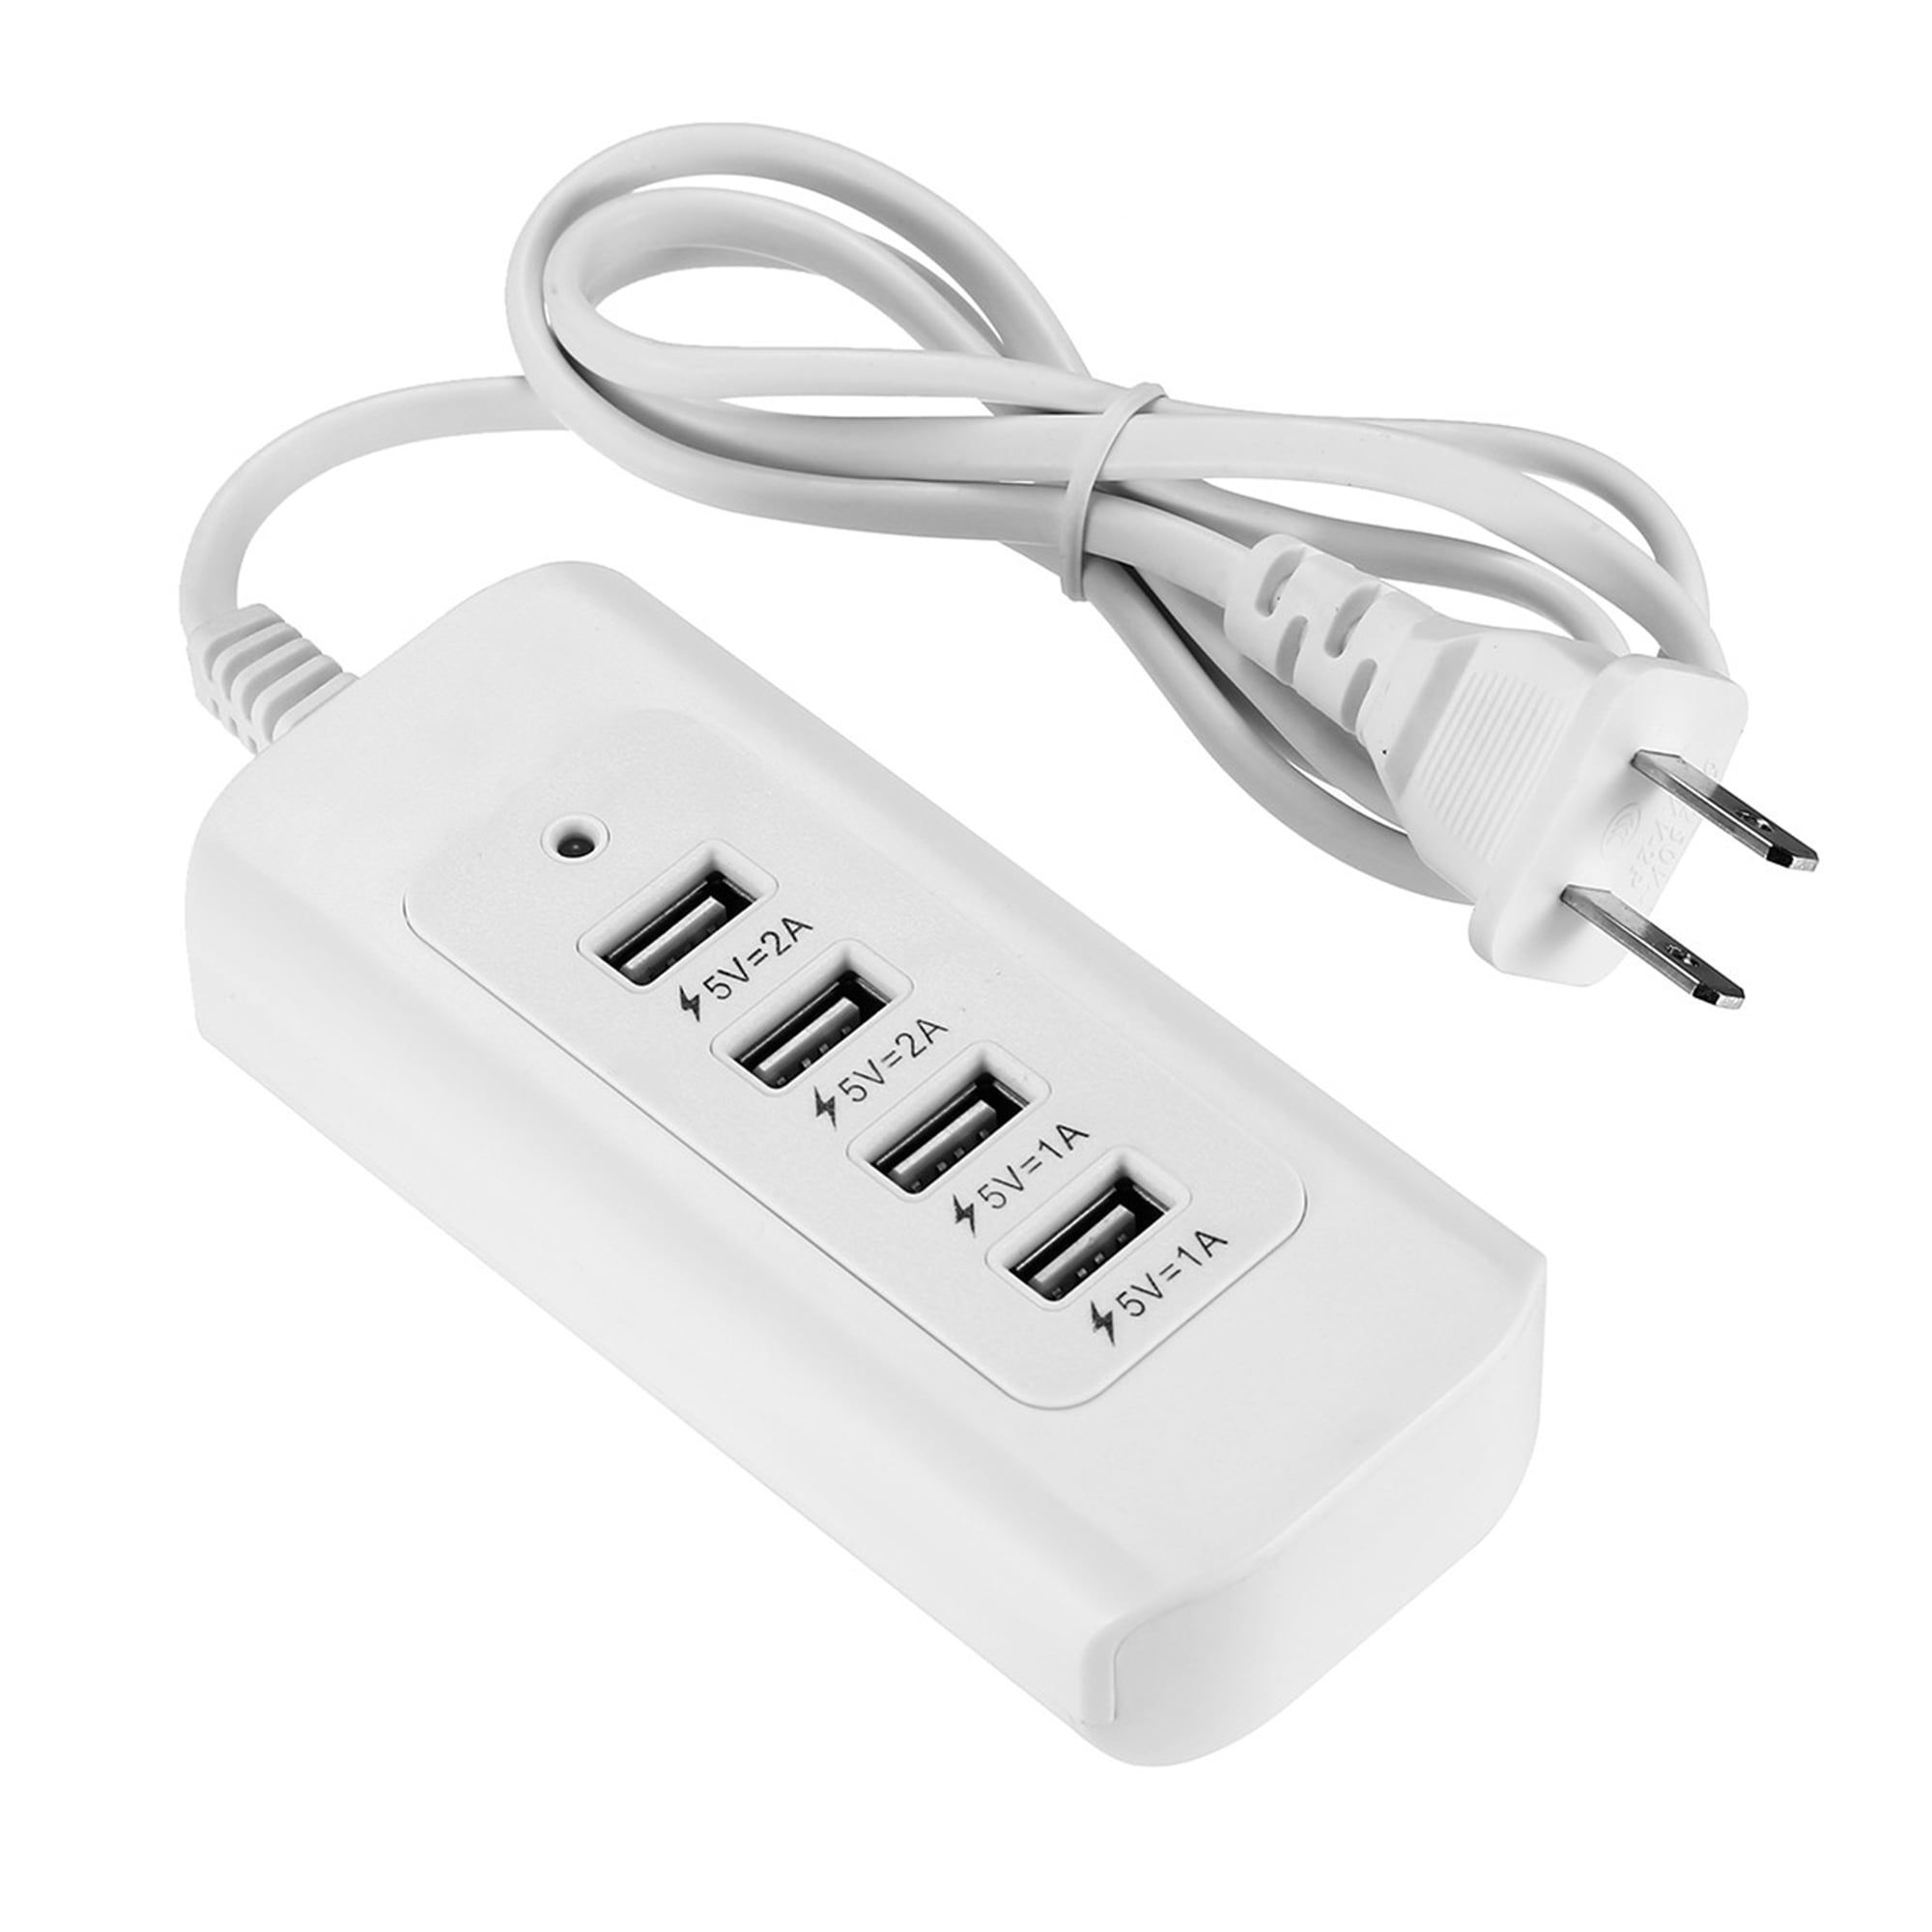 Poweradd Multi-Port USB Hub Wall Charger Fast Charging Station for Desktop Cellphone -